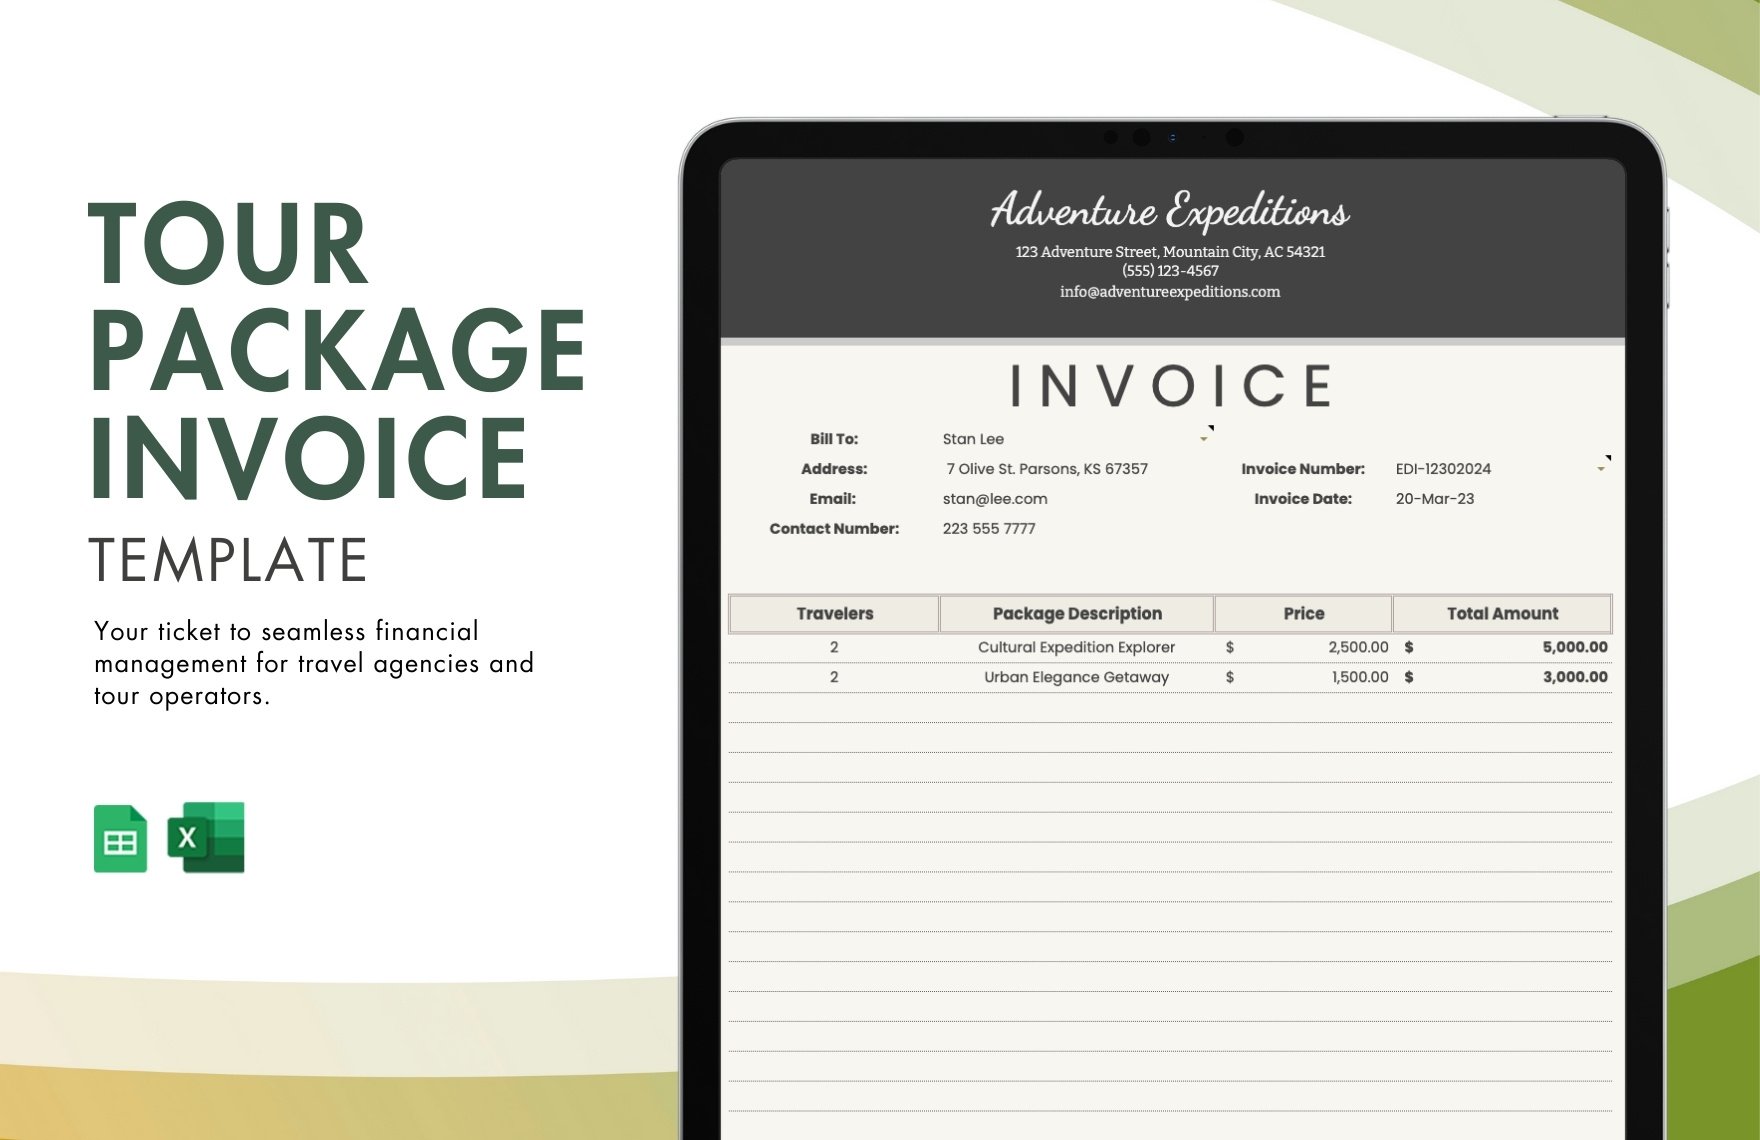 Tour Package Invoice Template